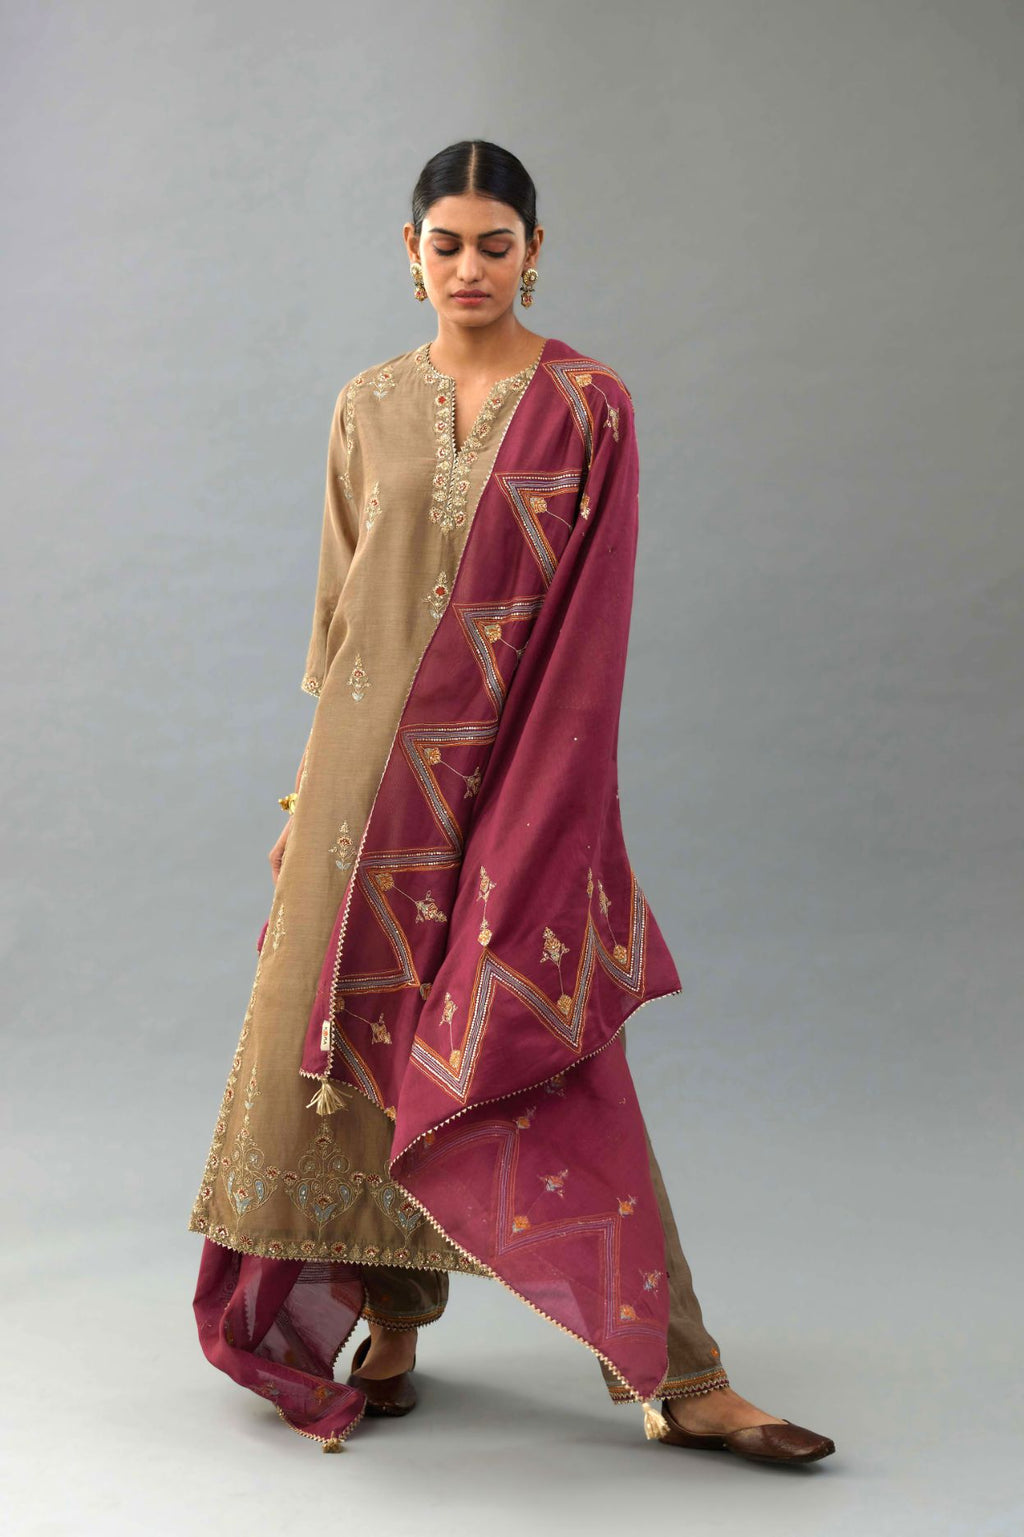 Taupe silk chanderi straight kurta set with all-over zari, dori and contrast silk thread embroidery, highlighted with gold sequins work.